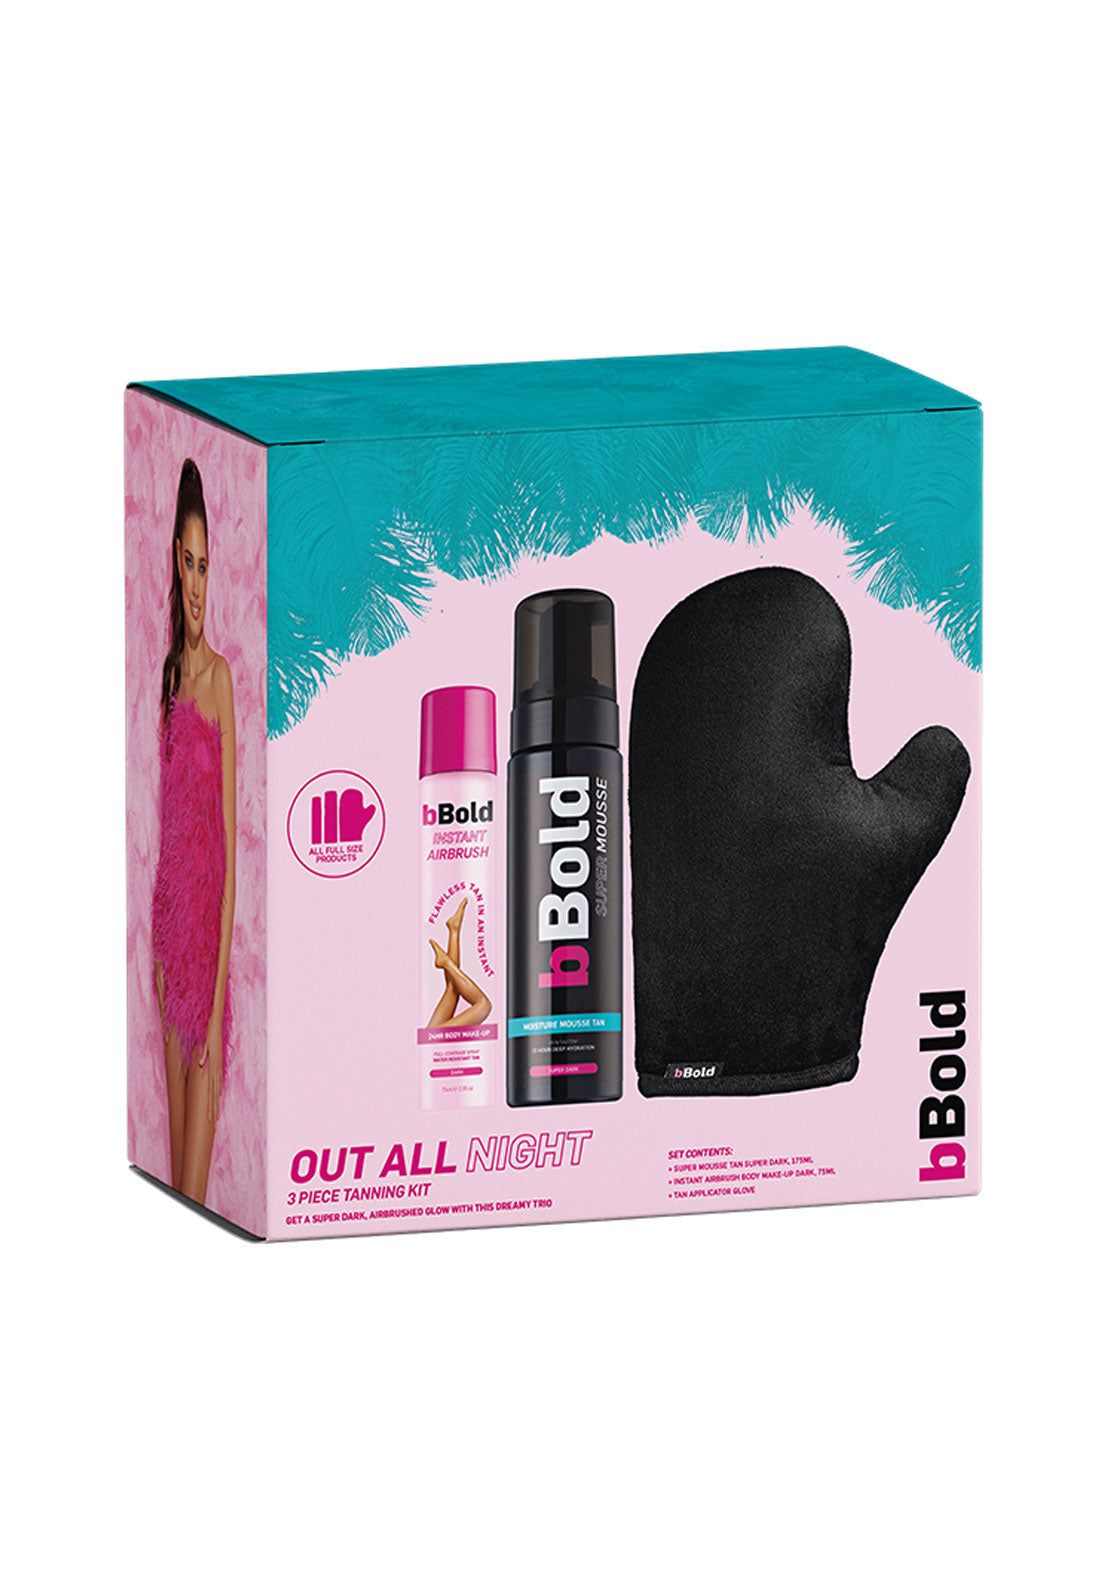 Out All Night 3 Piece Tanning Gift Set